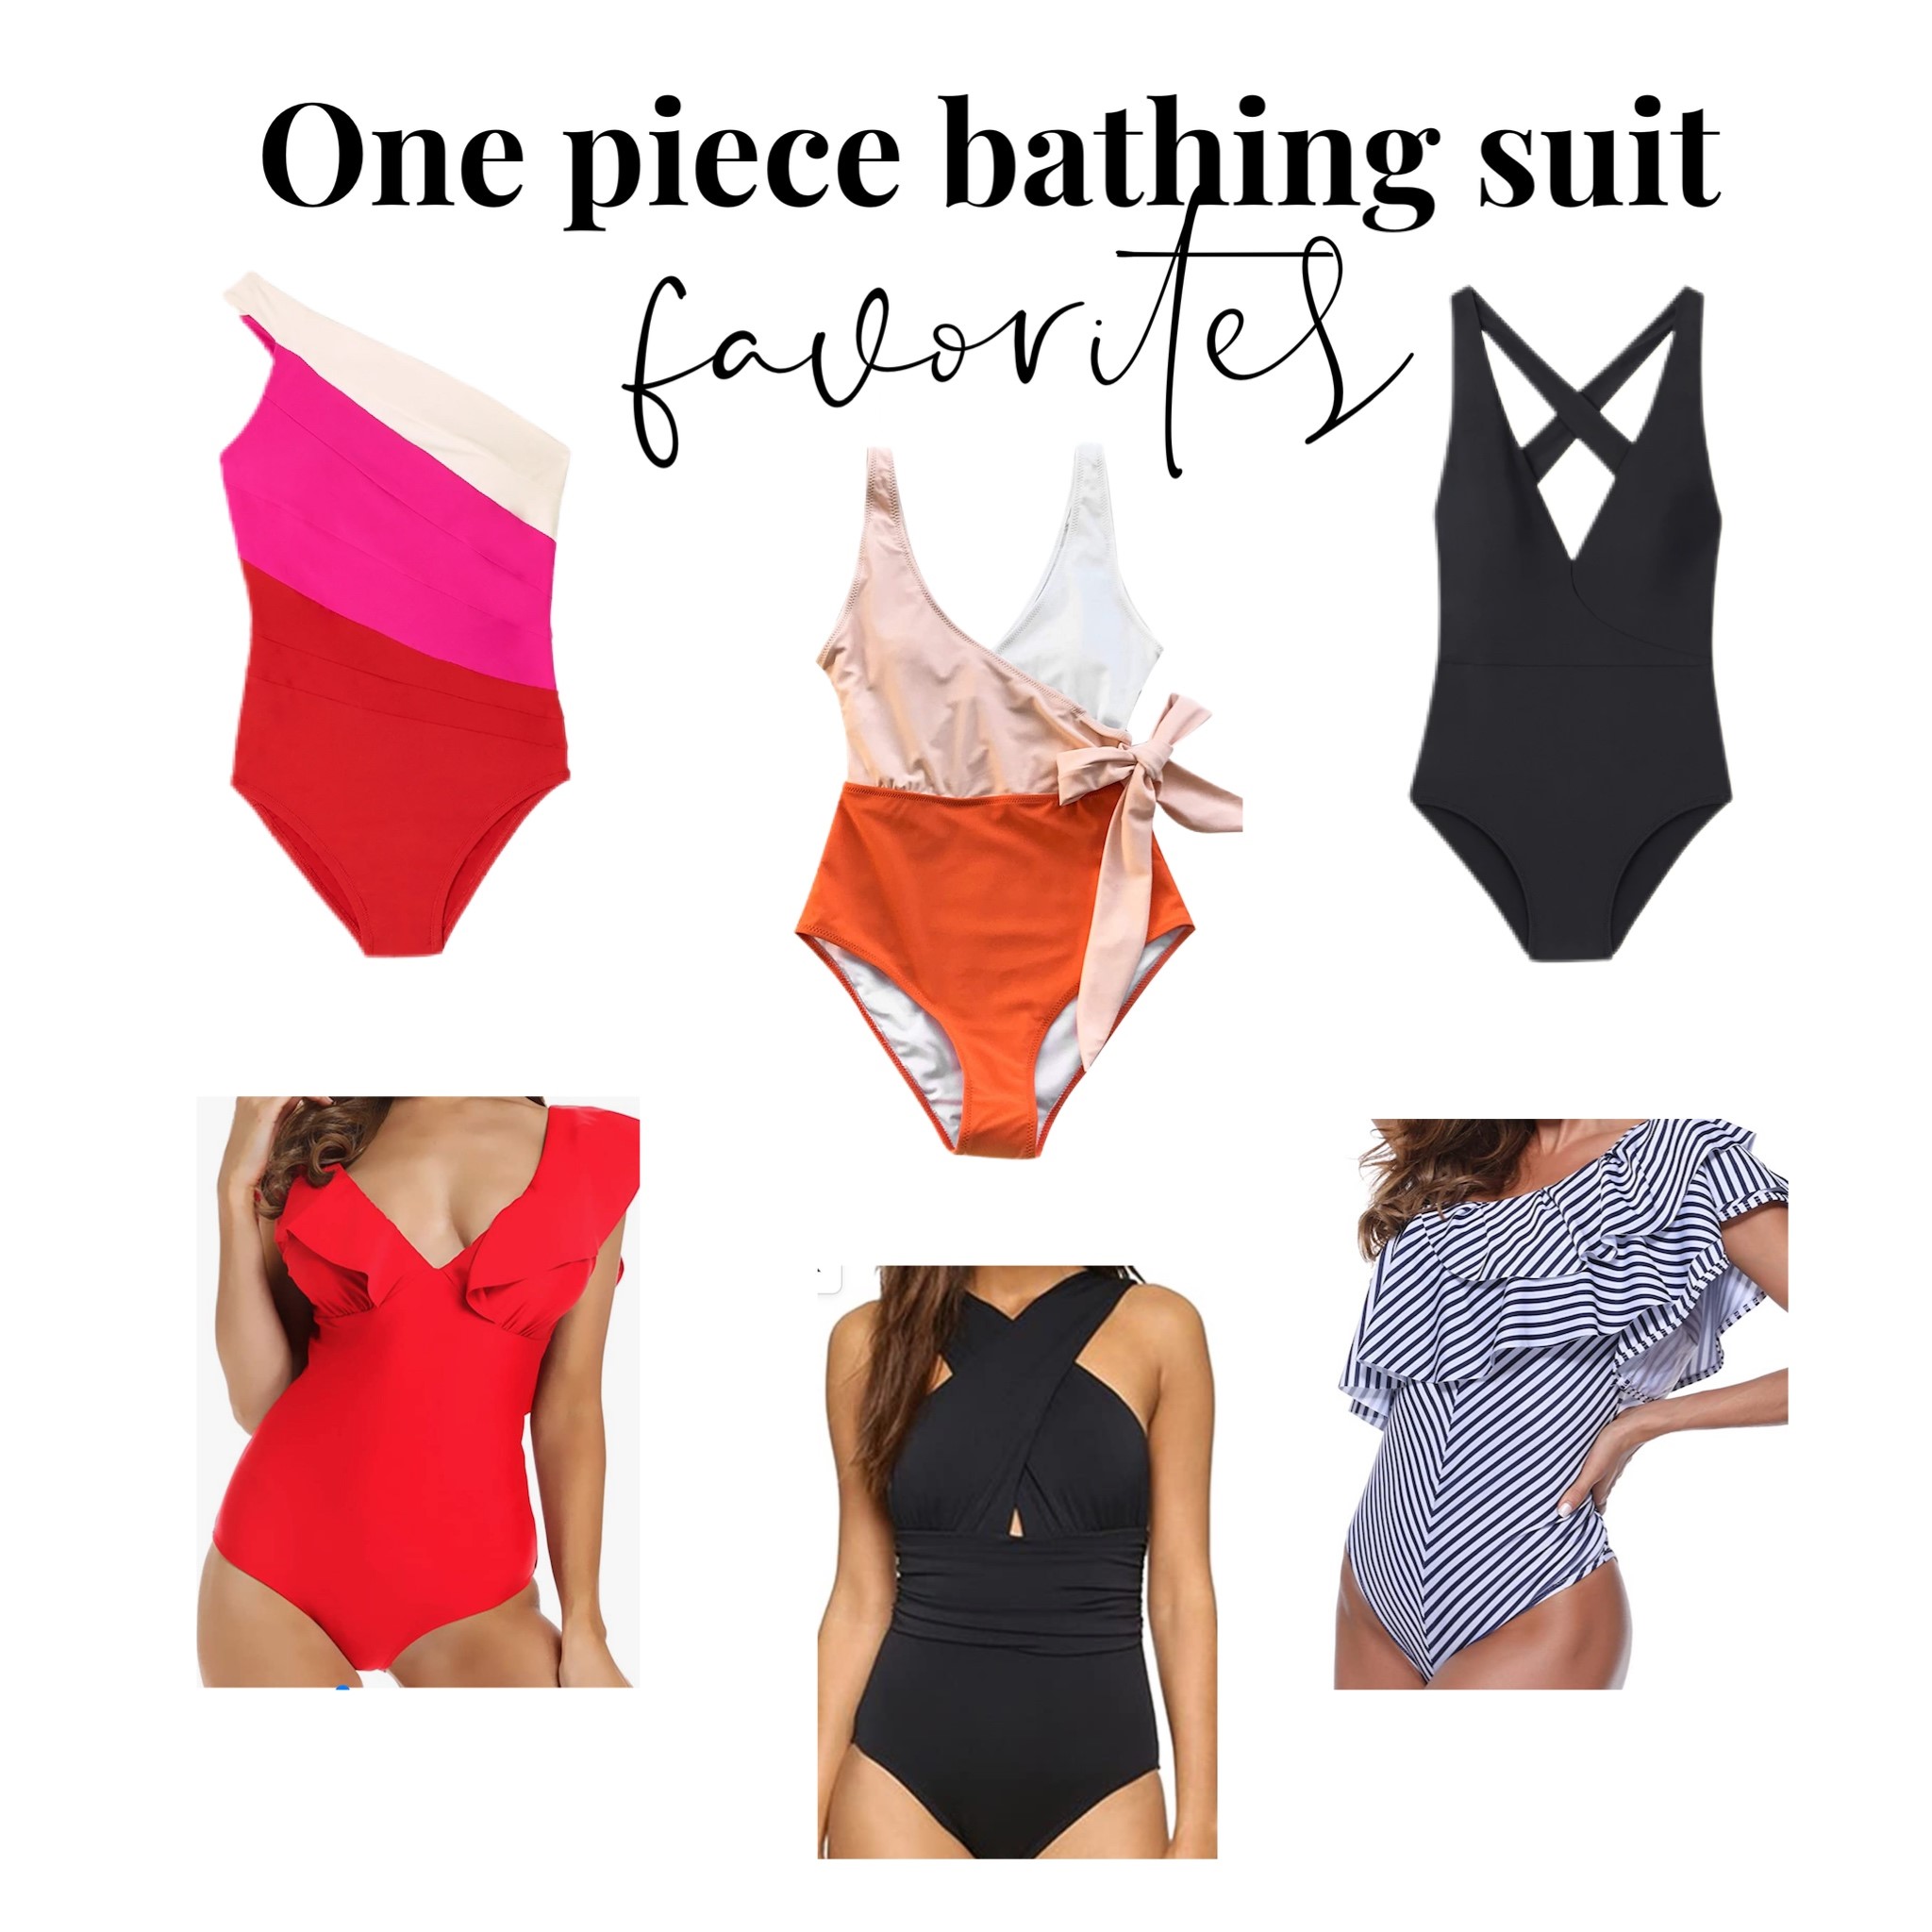 One piece bathing suit favorites - graciously saved